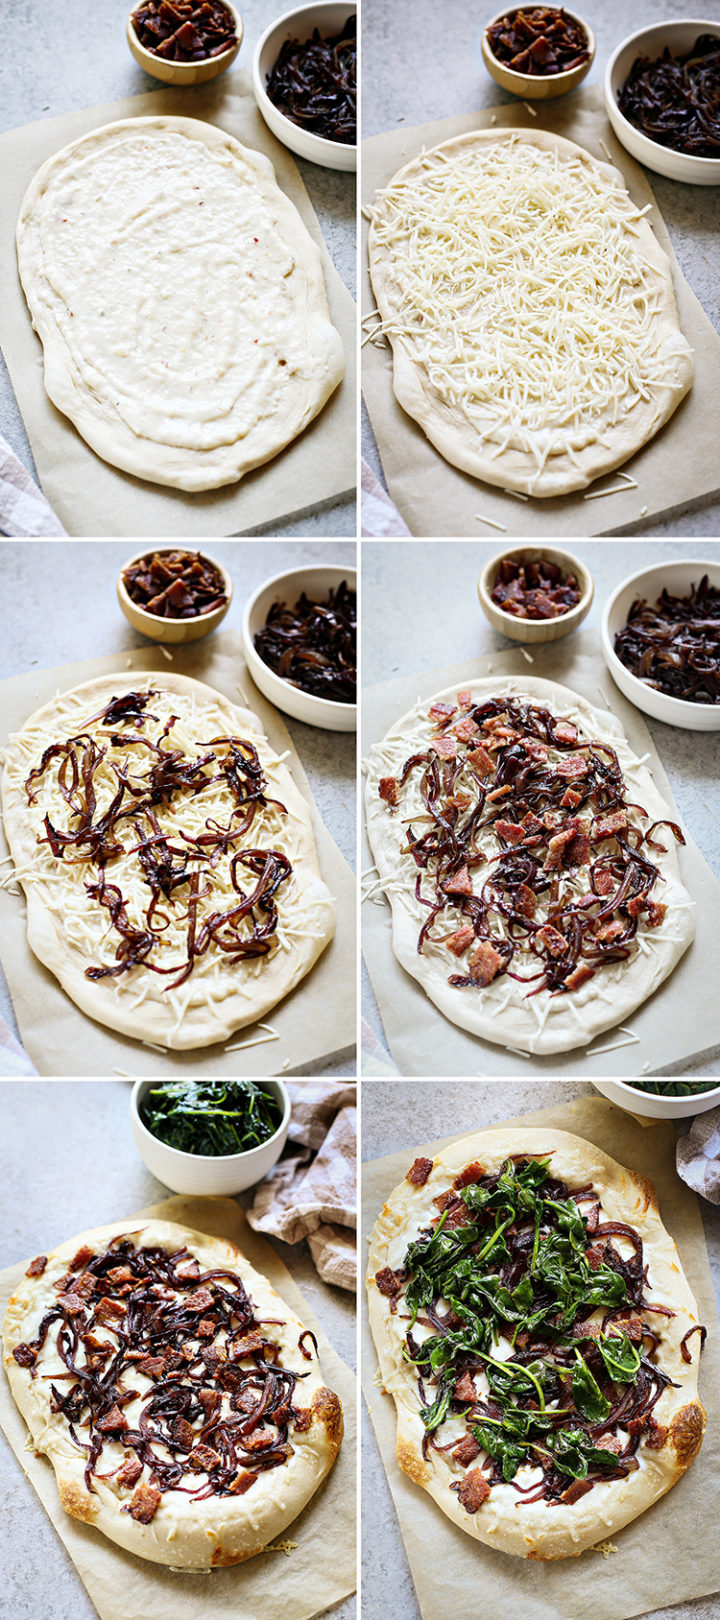 step by step photos showing how to make Bacon Pizza with Caramelized Onion